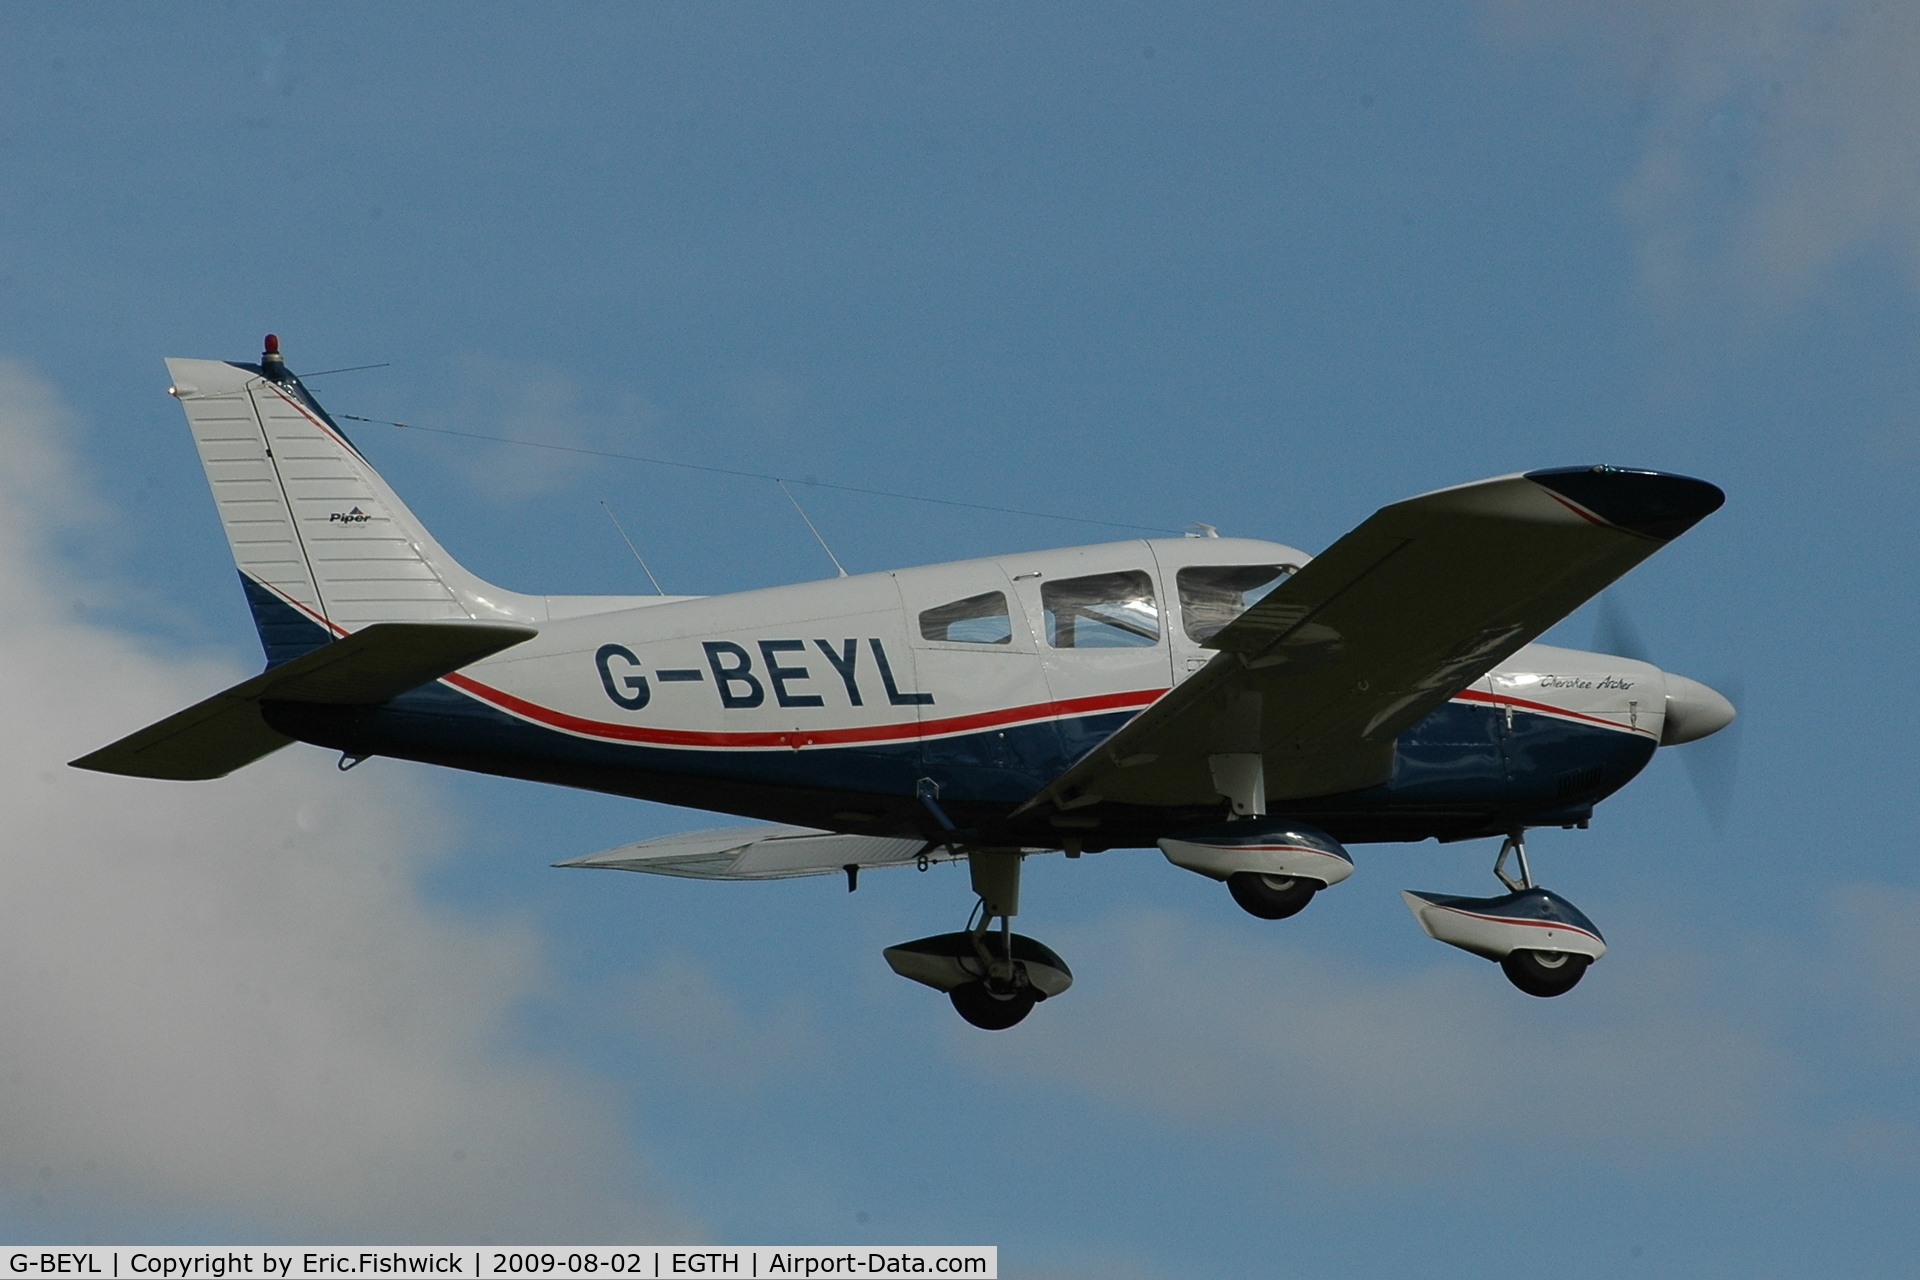 G-BEYL, 1974 Piper PA-28-180 Cherokee Archer C/N 28-7405098, G-BEYL departing Shuttleworth Military Pagent Air Display Aug 09